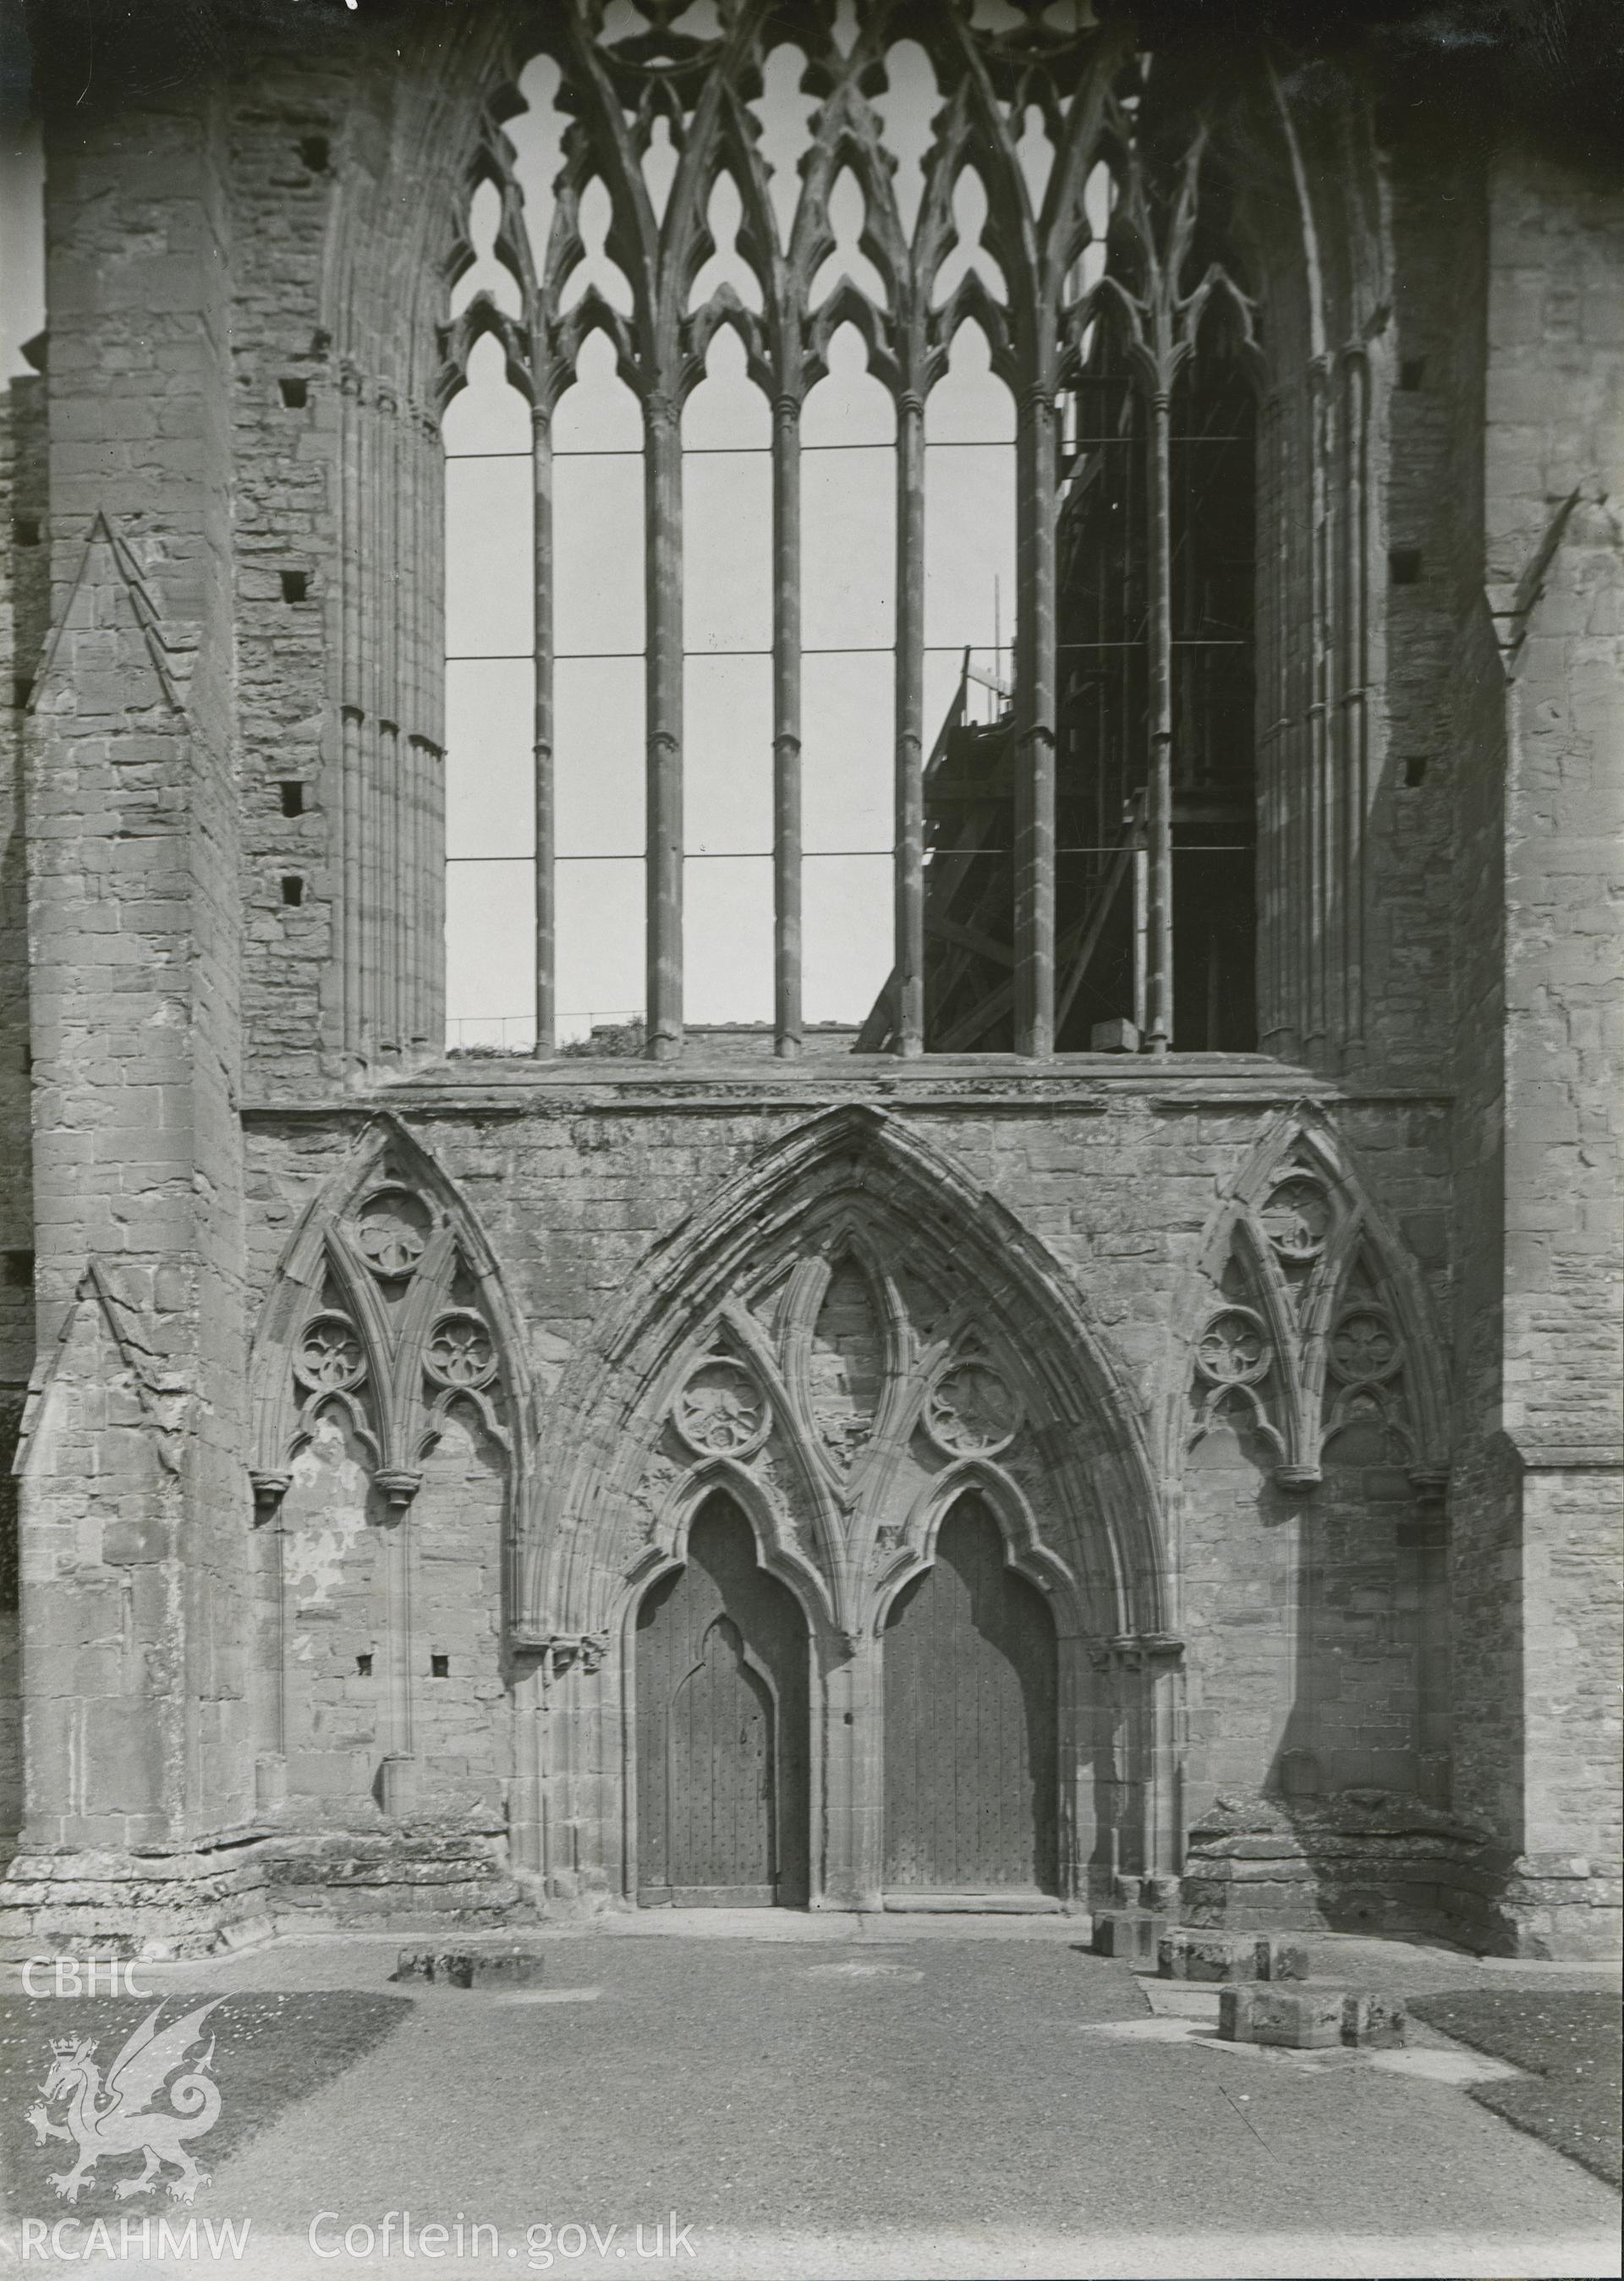 Digital copy of an exterior view of west window and entrance to Tintern Abbey.